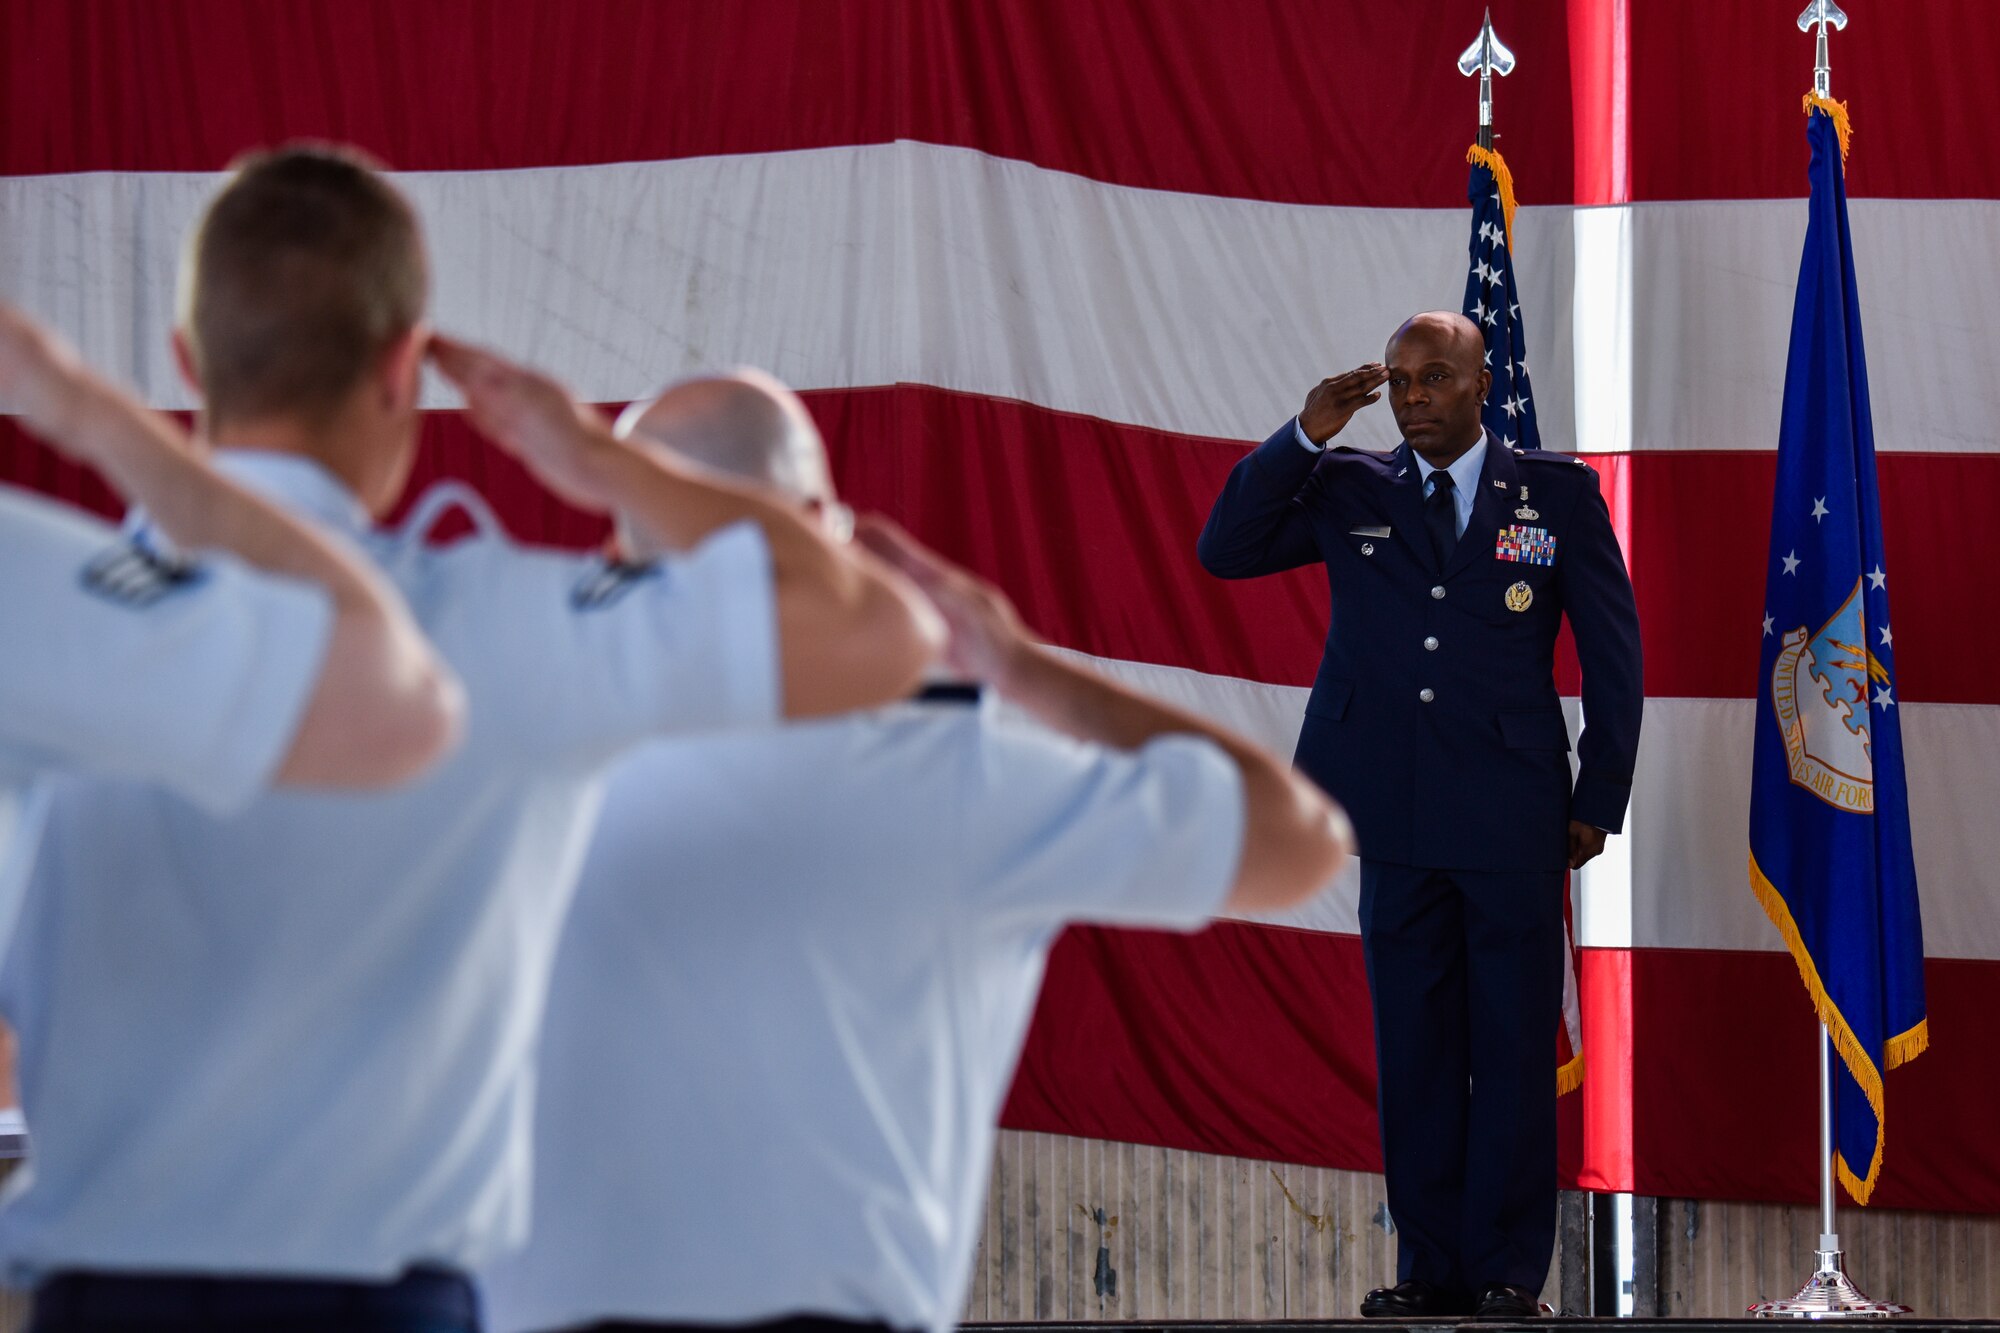 U.S. Air Force Col. Gregory Coleman, incoming 377th Medical Group commander, renders his first salute to his Airmen in a change of command ceremony at Kirtland Air Force Base, N.M., June 27, 2019. The mission of the 377th MDG is to advance the human weapons system, promote optimal health, and provide trusted care to Team Kirtland. (U.S. Air Force photo by Airman 1st Class Austin J. Prisbrey)